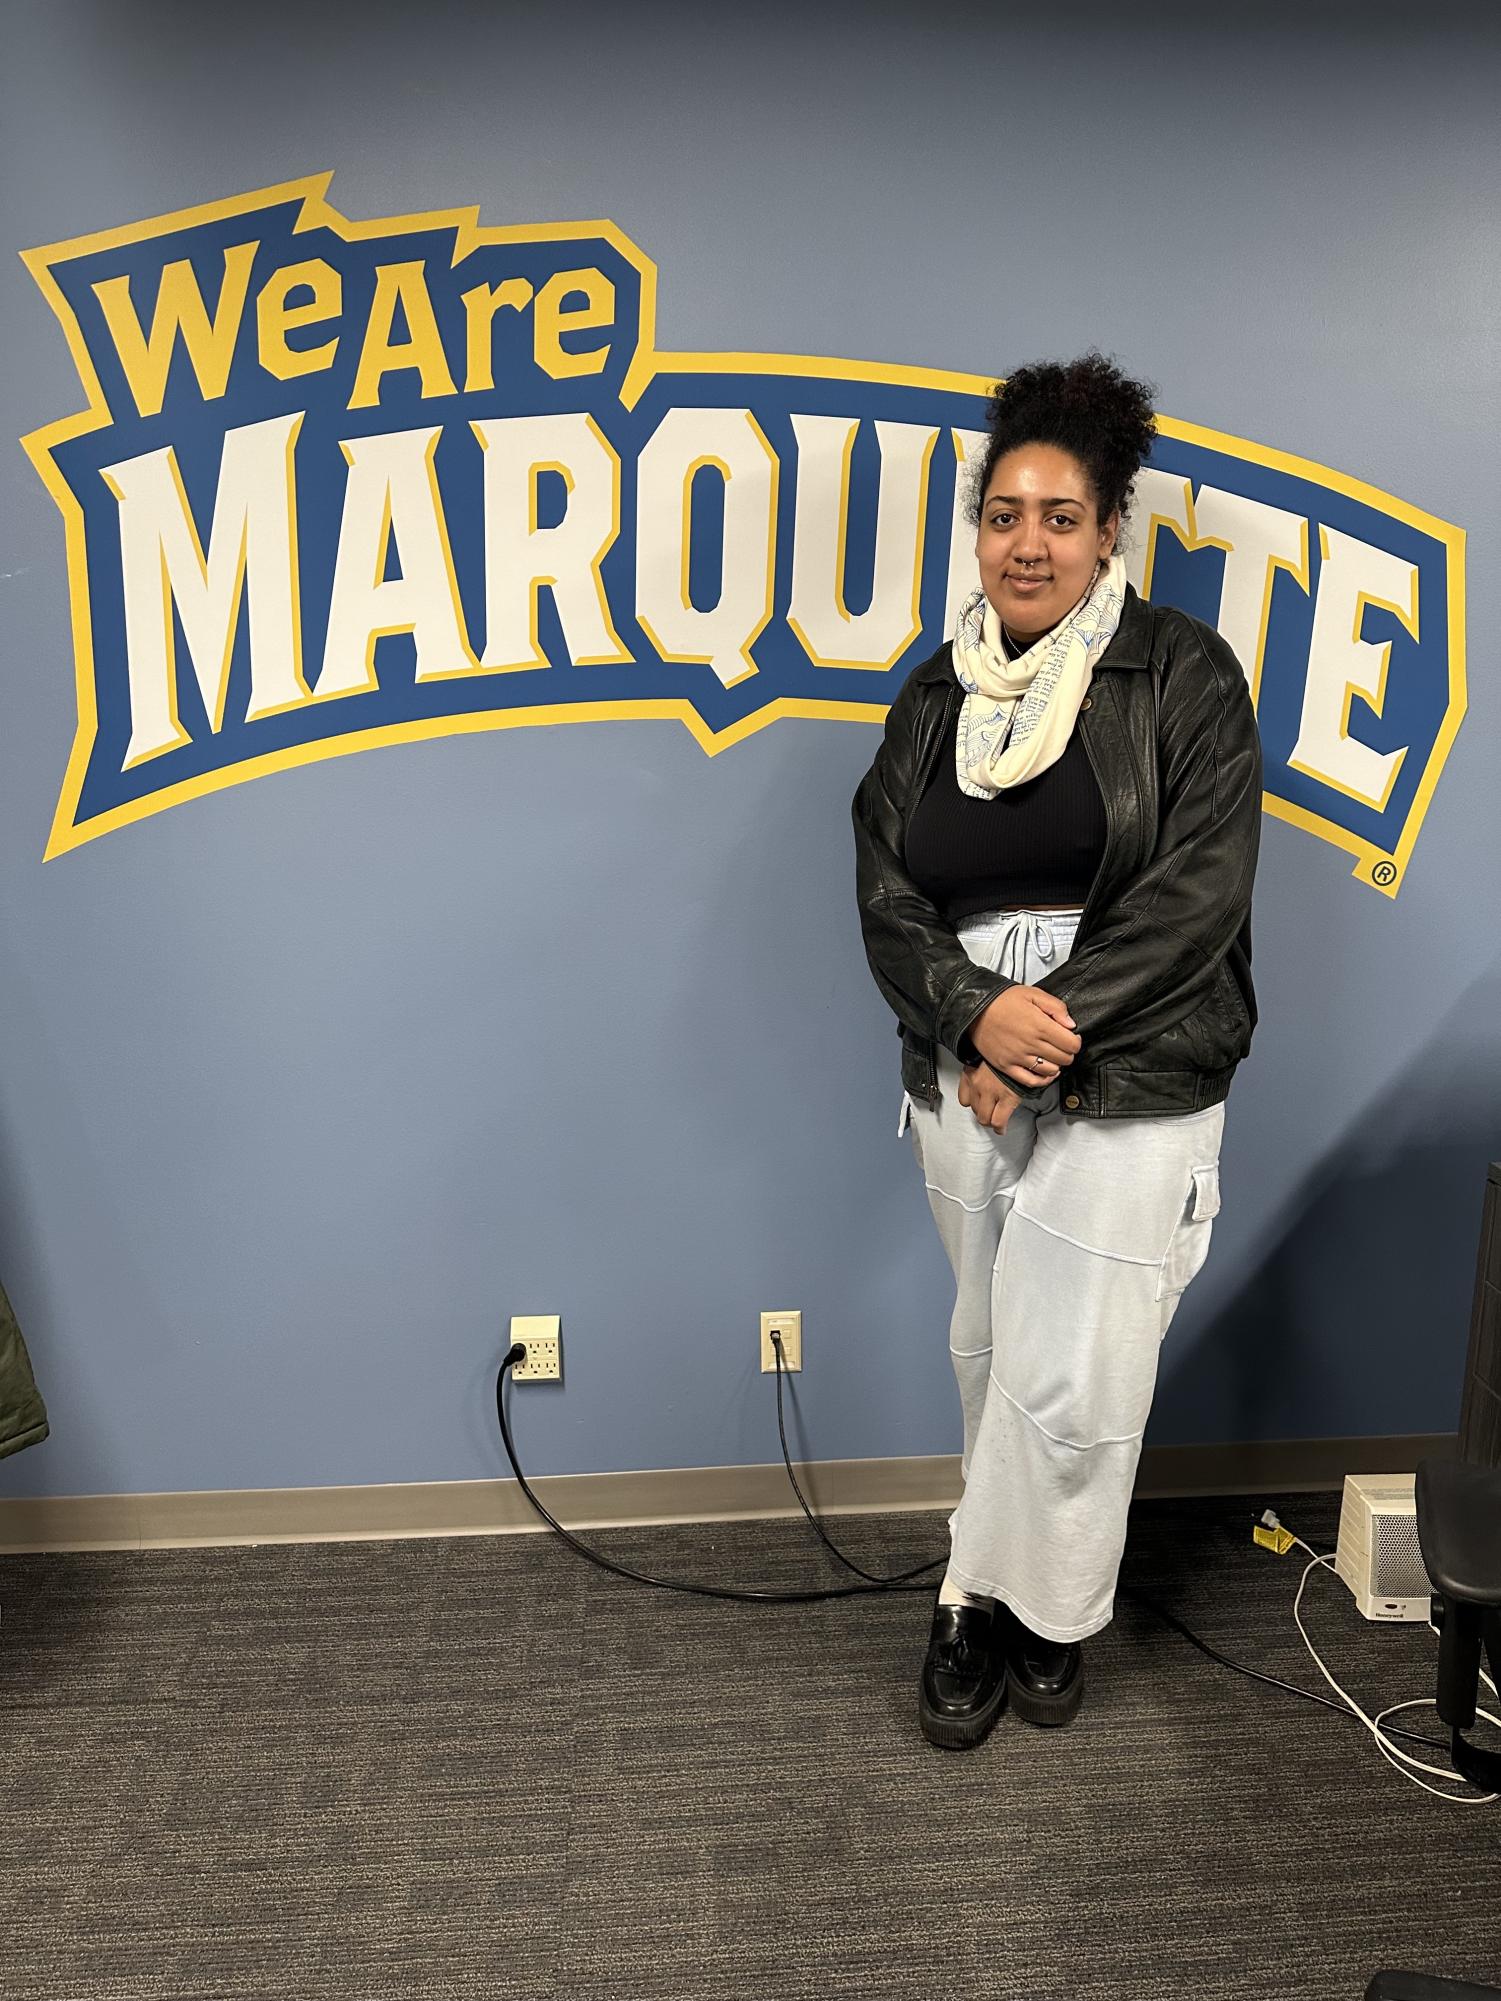 2022 alum Gnally Boukar poses in front of the Marquette sign in the Urban Scholars lounge. Photo provided by Gnally Boukar.